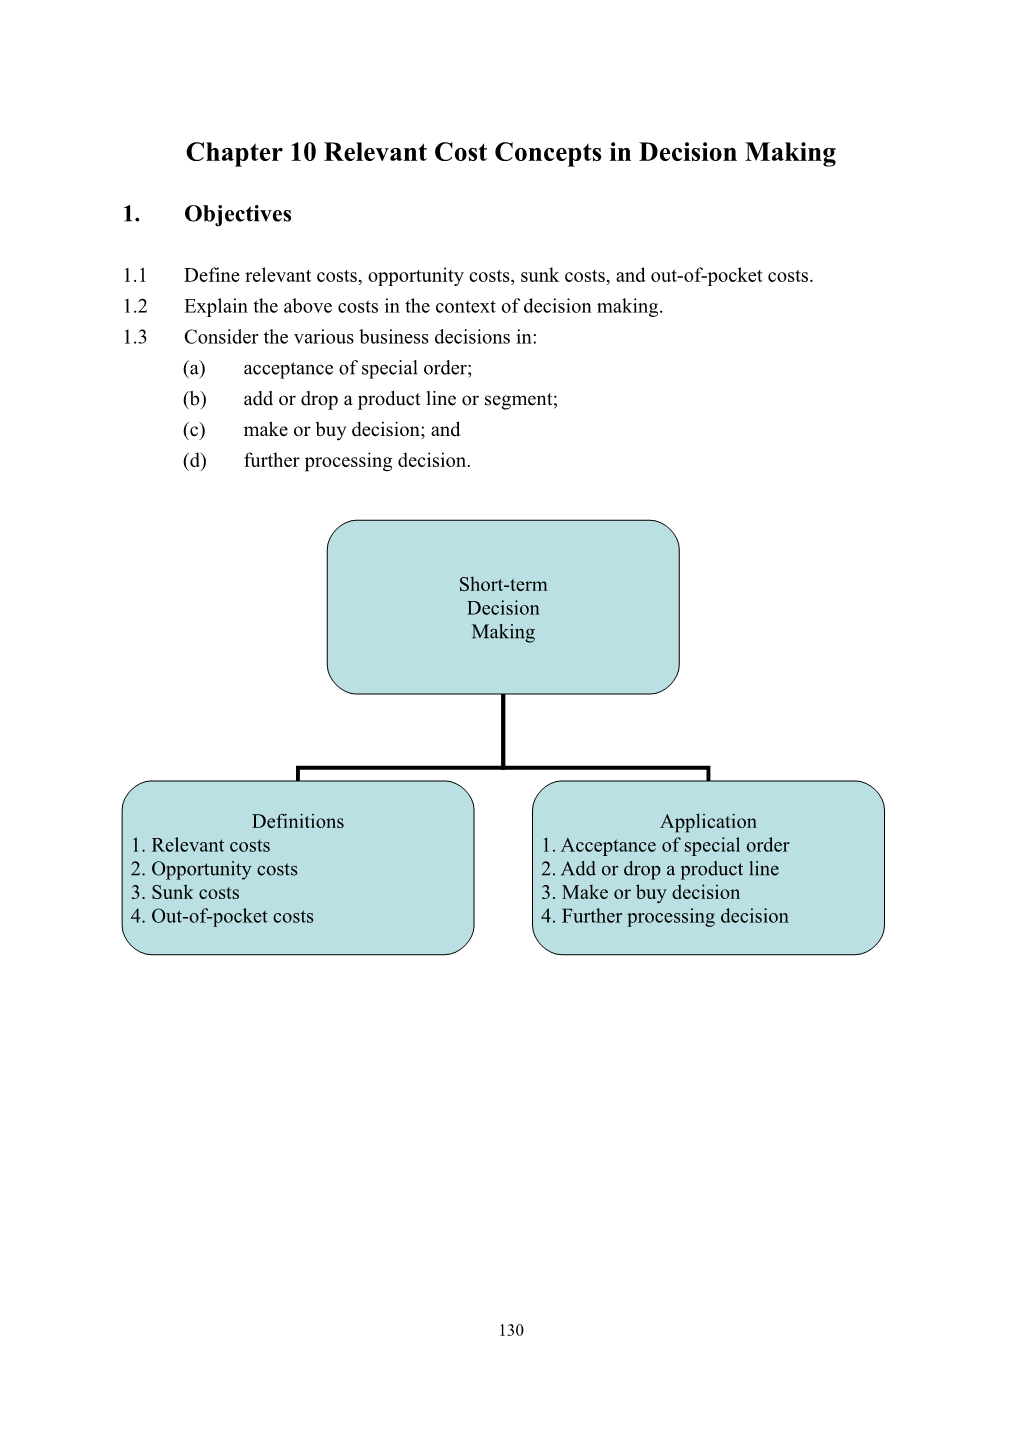 Chapter 6 Relevant Cost Concepts in Decision Making